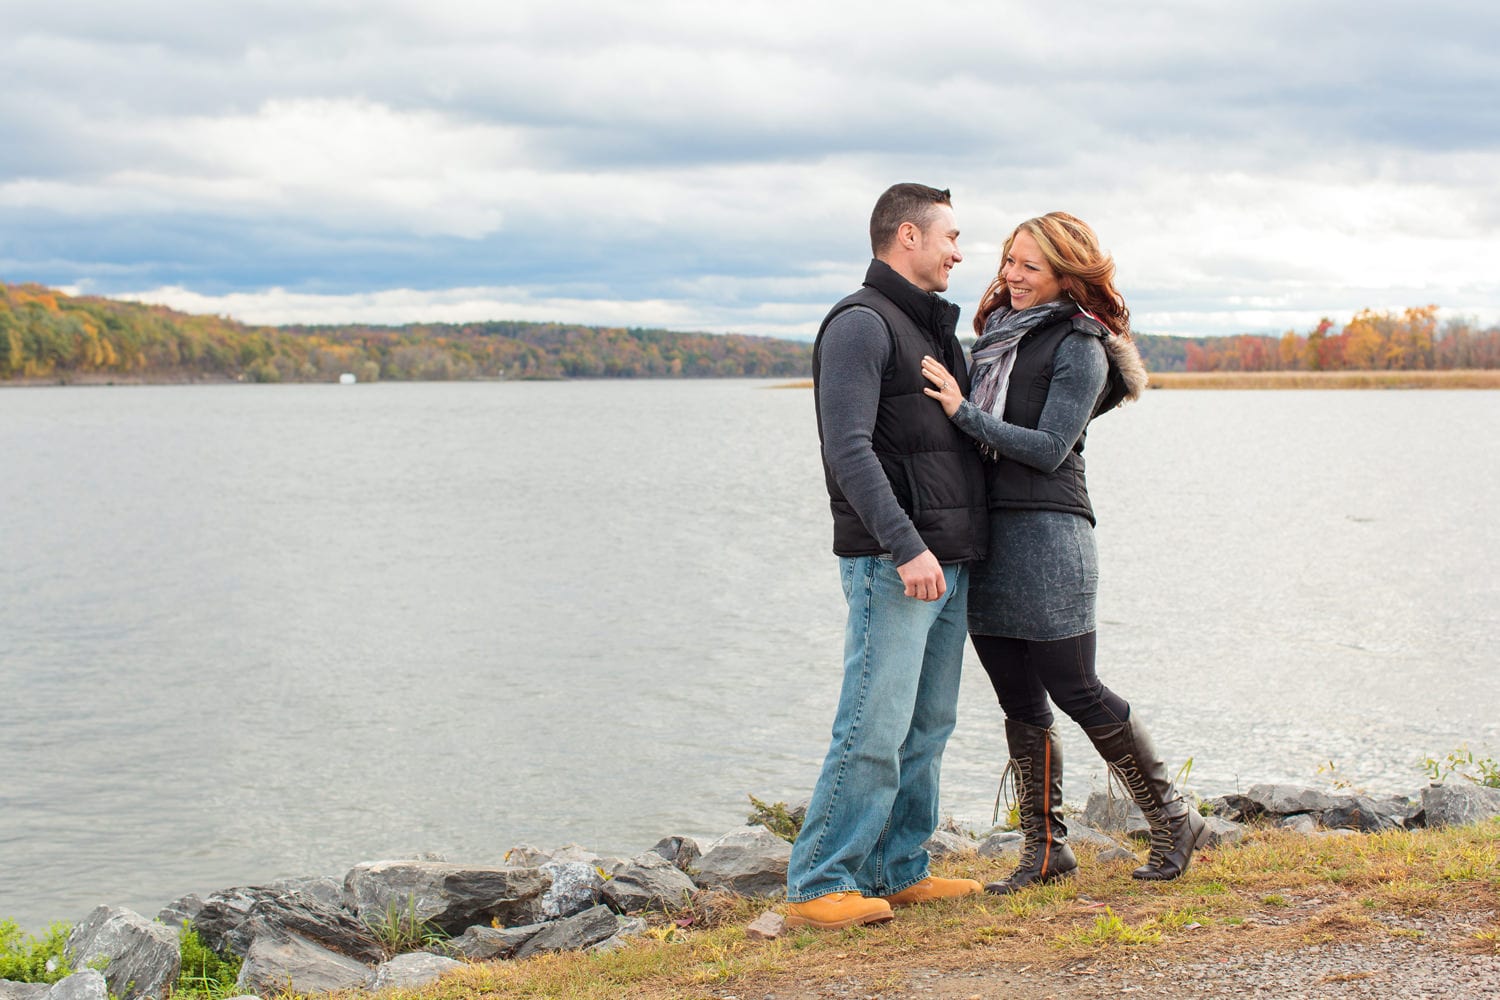 001-catskill_point_engagement_photography